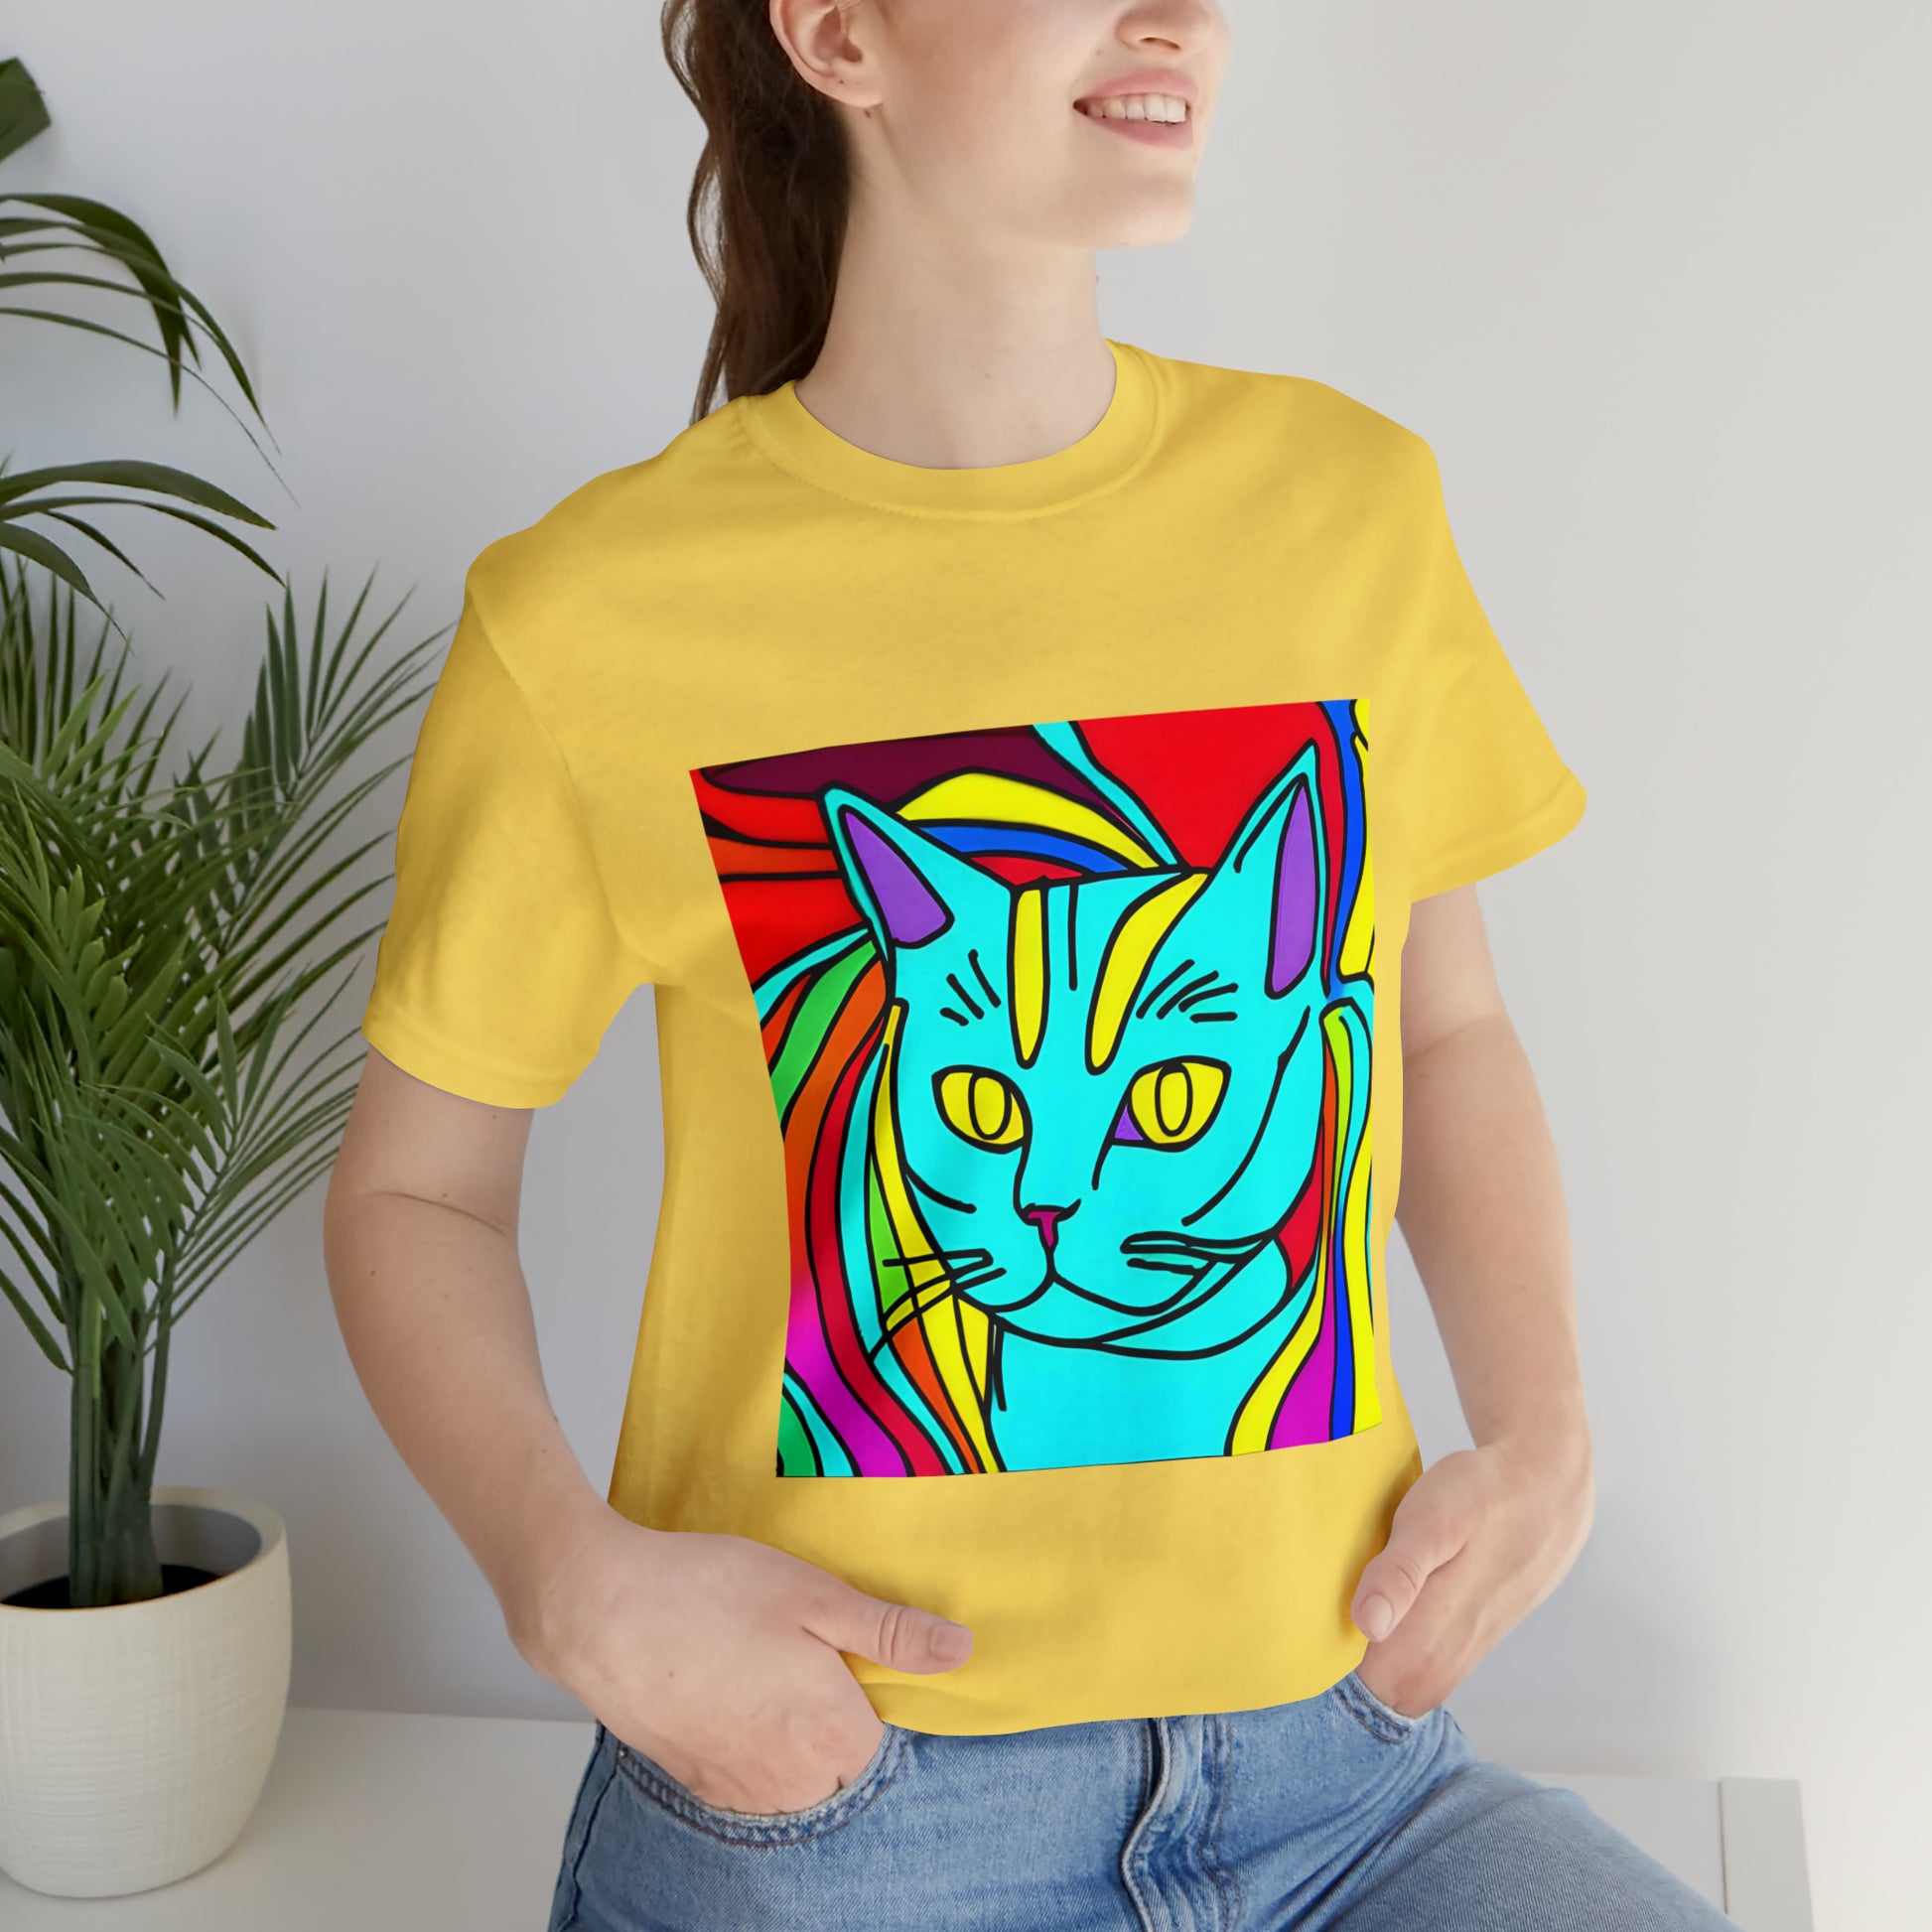 Colorful art cat t-shirt, Psychedelic Cat Shirt, Trippy Cat Shirt, Cool Graphic Tshirts, Mystical cat tee, Cute Cat Shirt, cat lover gift